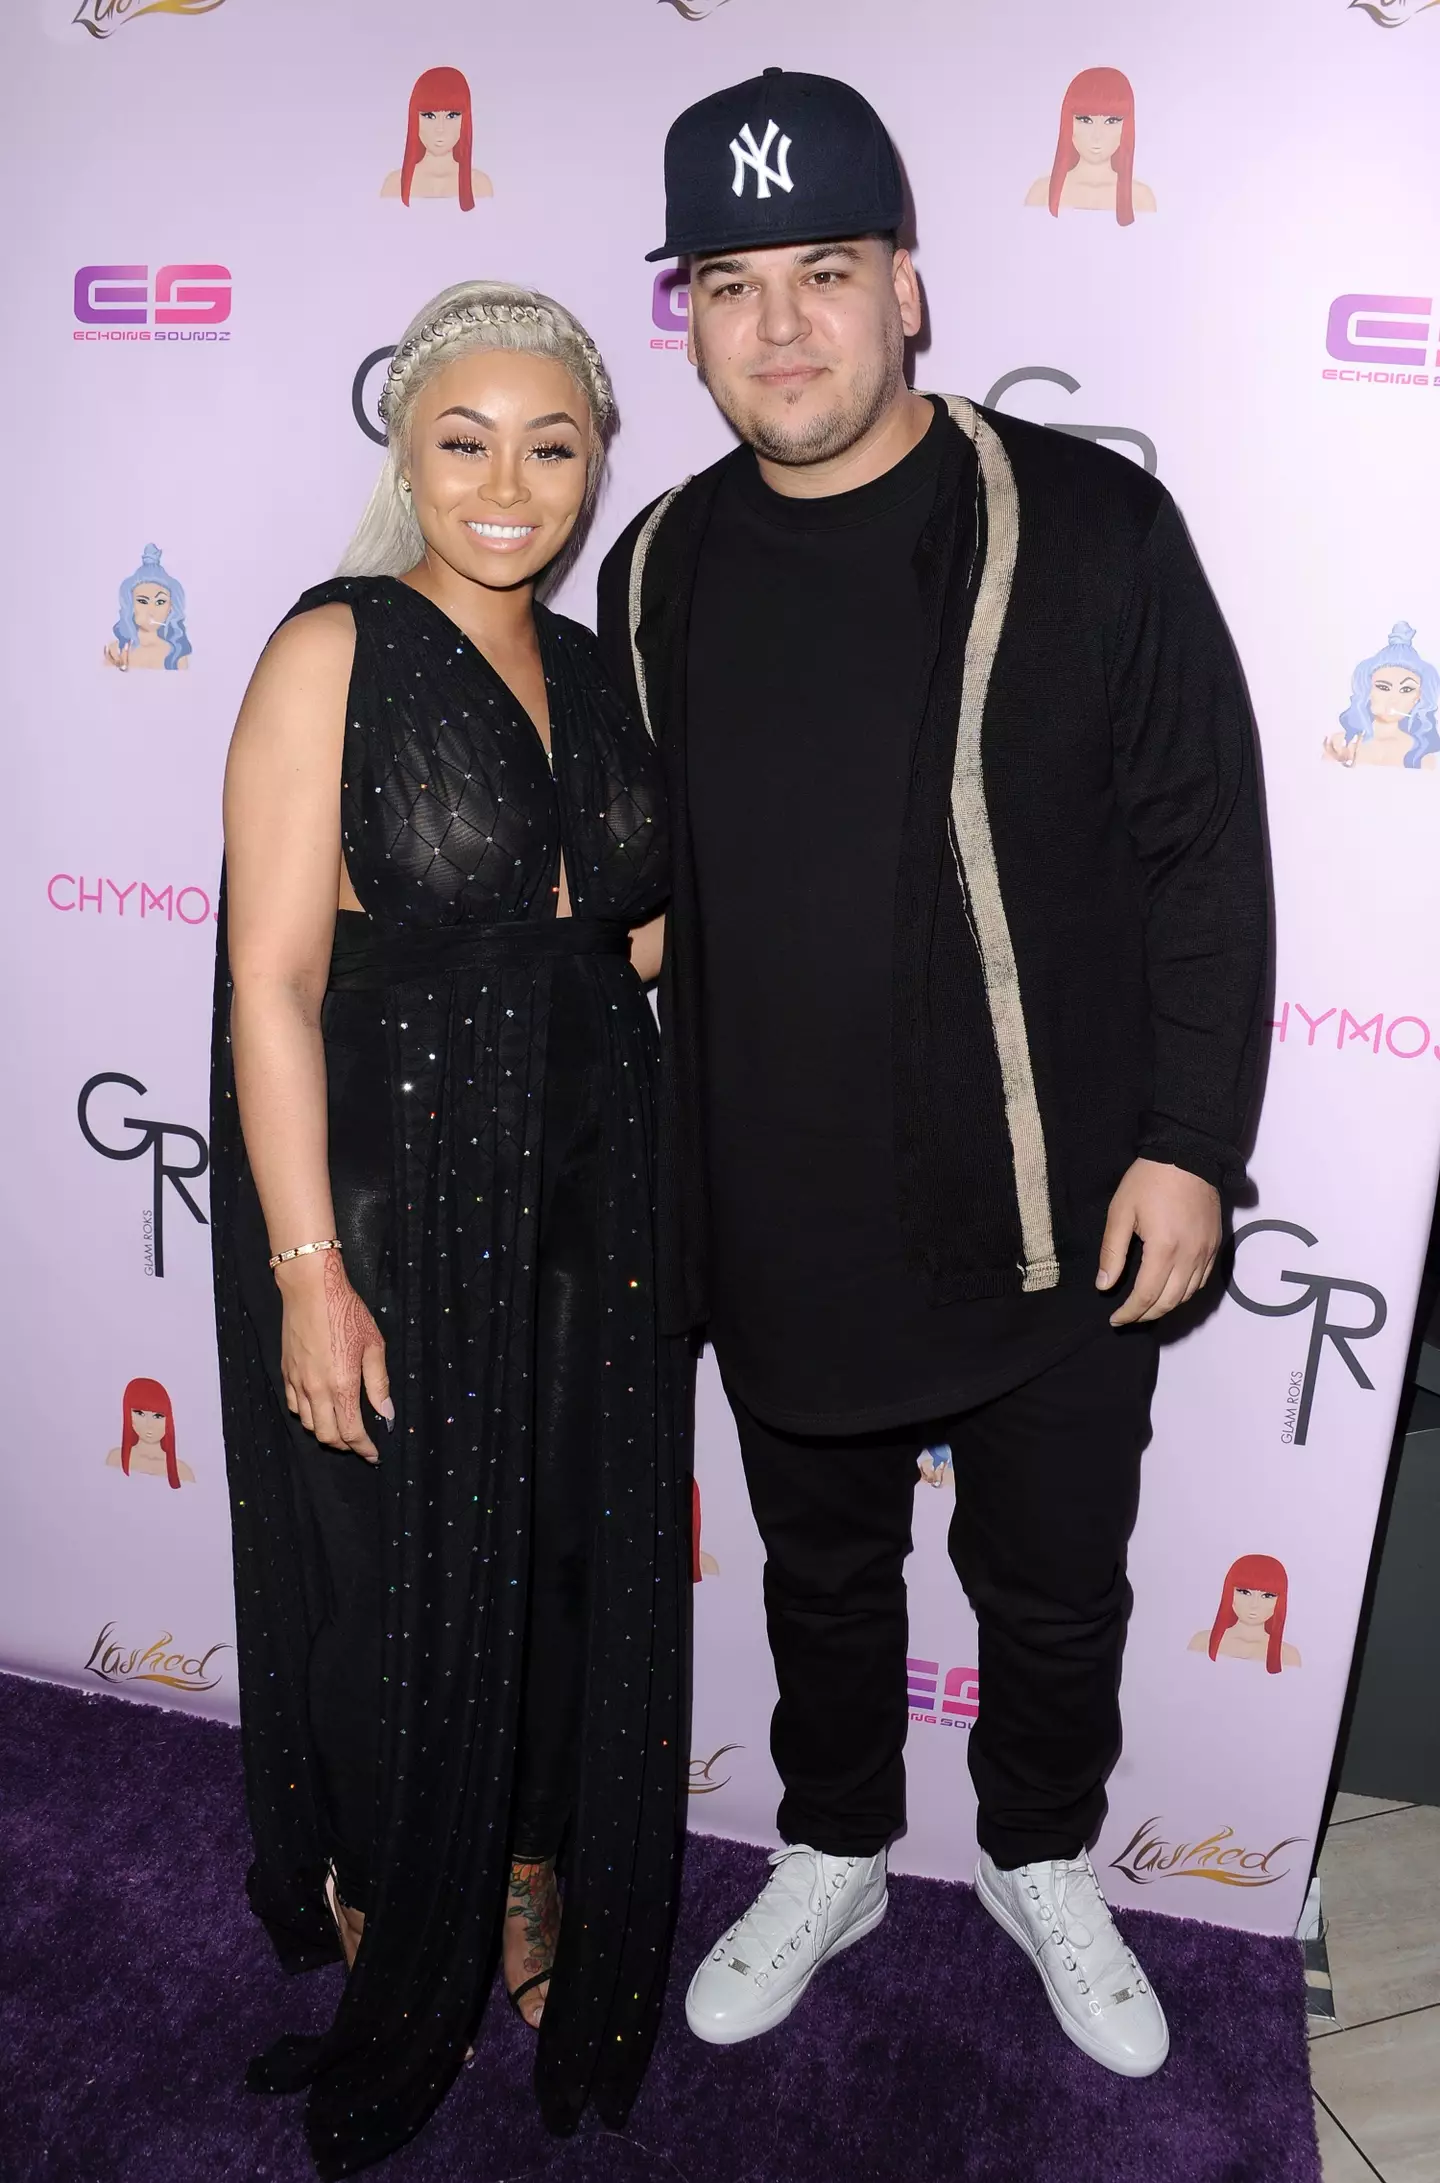 Blac Chyna and Rob Kardashian have a daughter together.